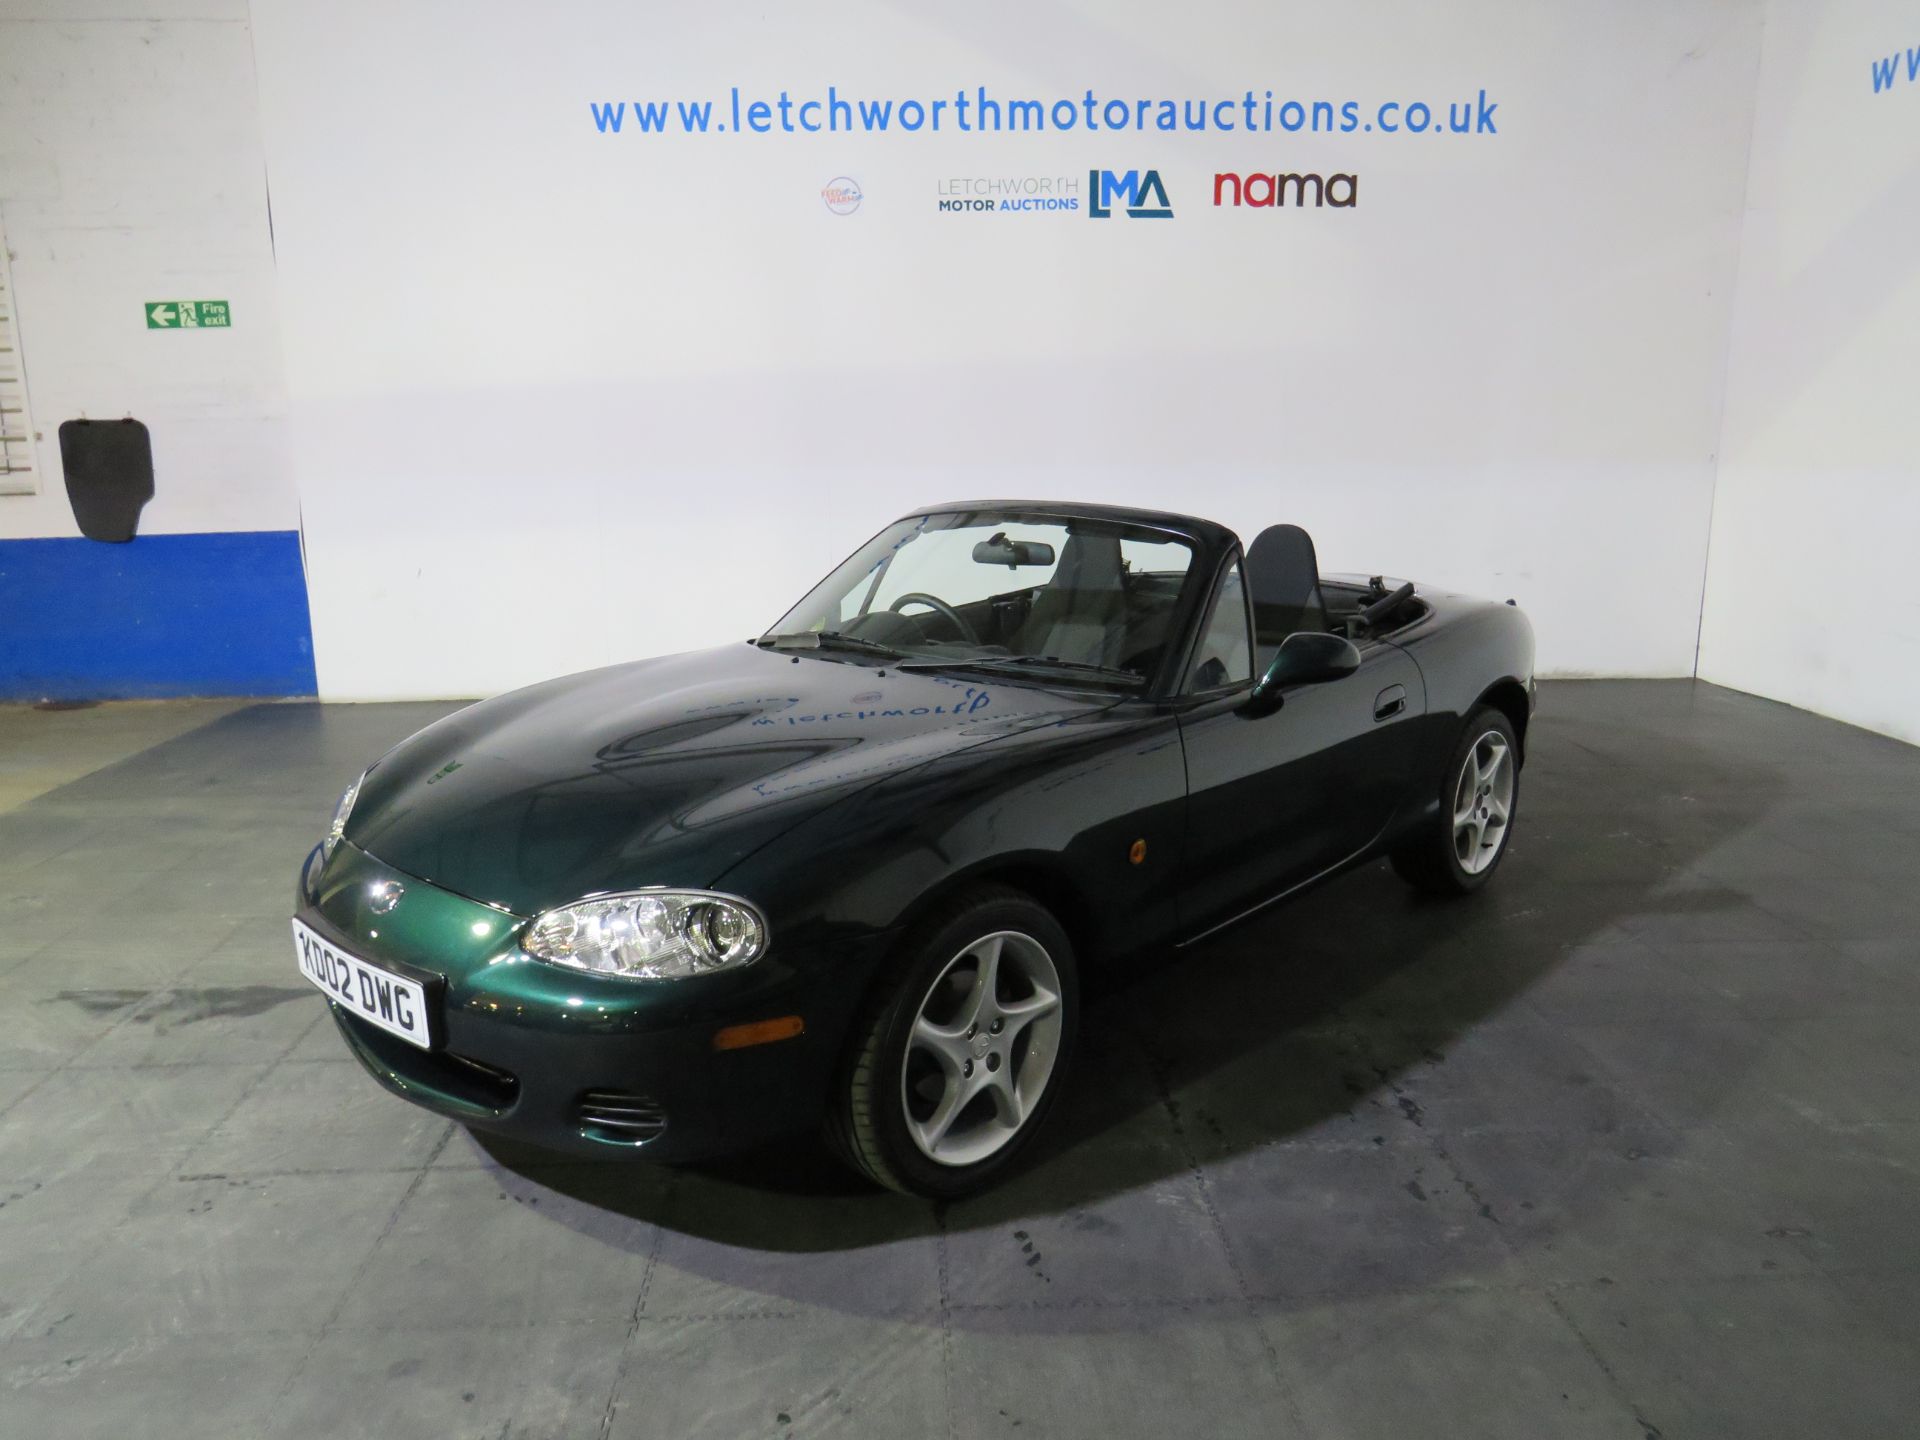 2002 Mazda MX-5 - 1598cc - 1,900 MILES FROM NEW - Image 5 of 39